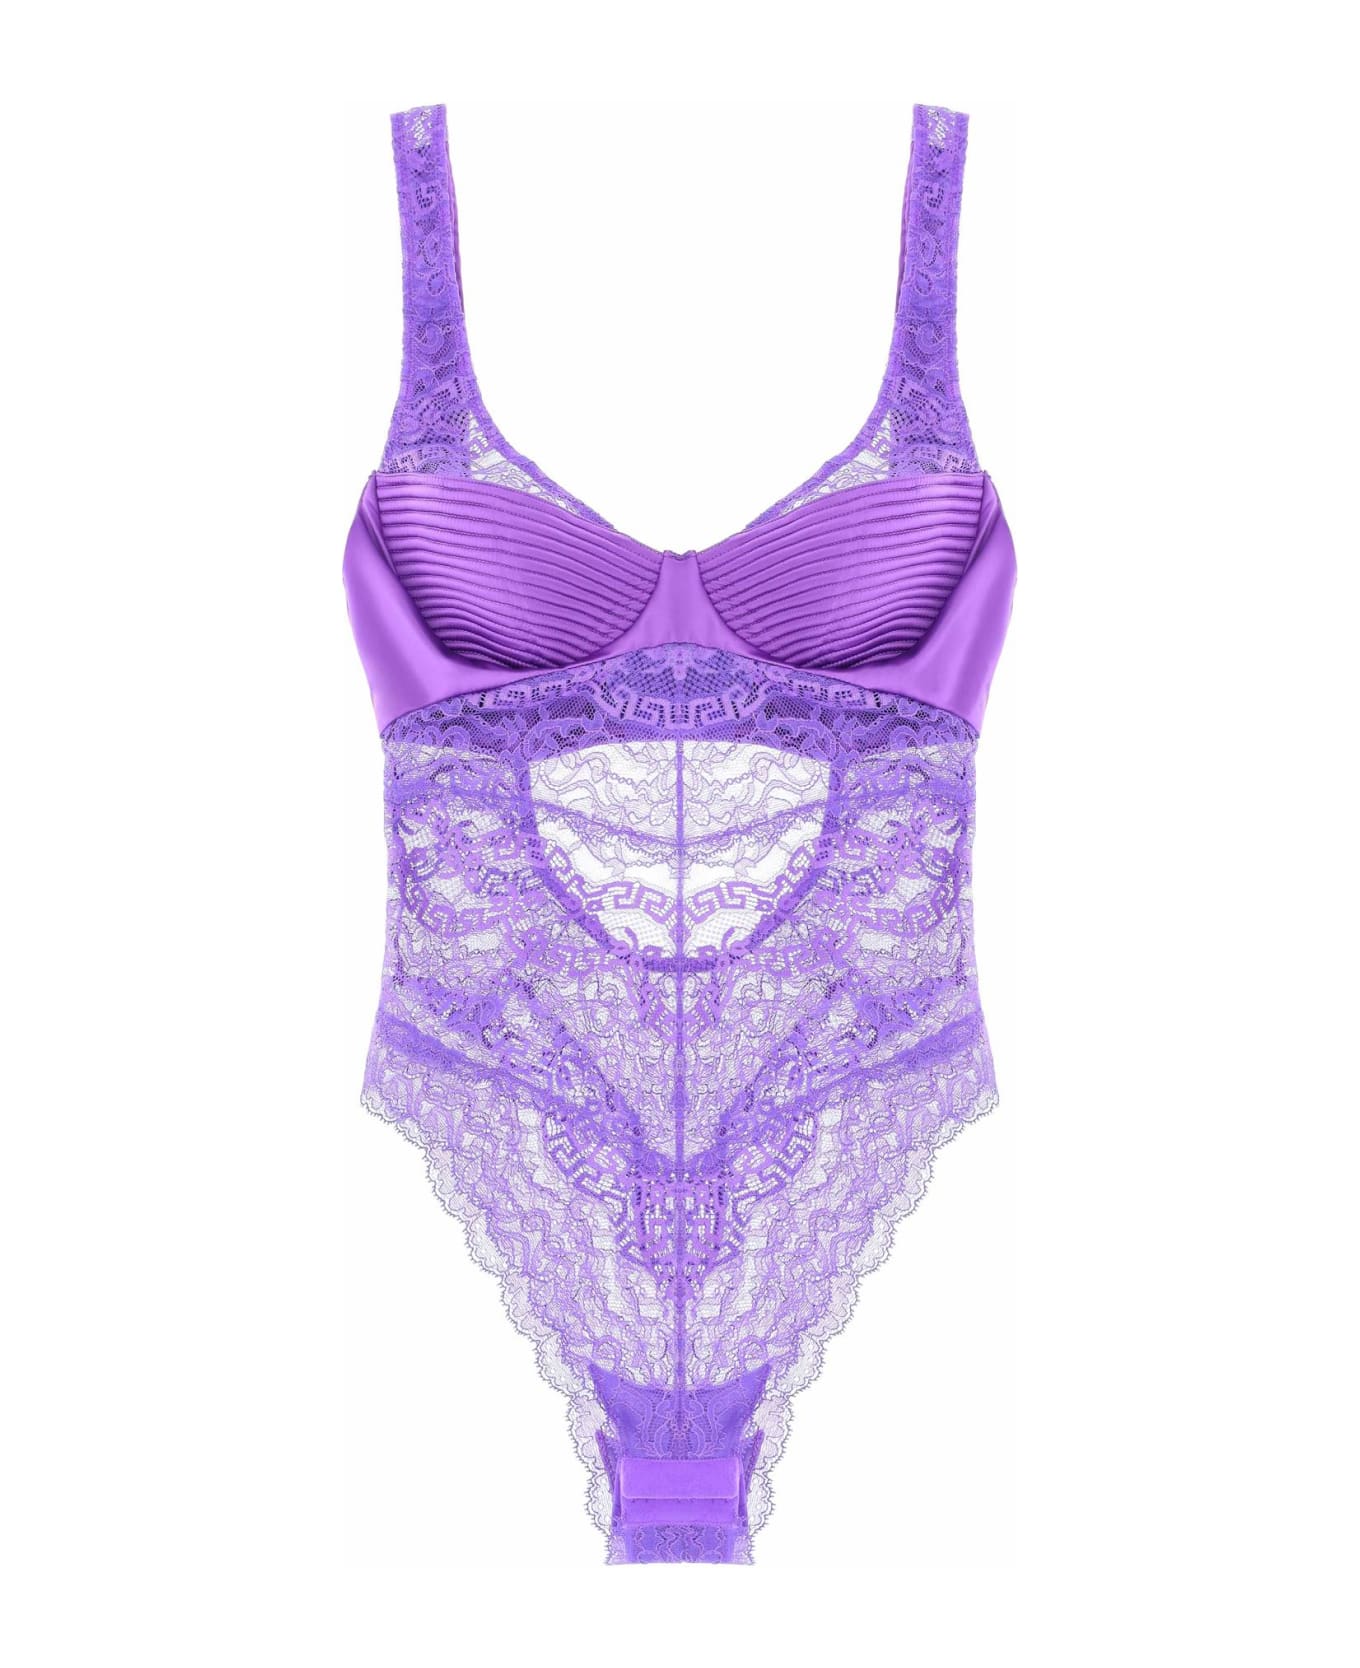 Versace Satin And Lace Bodysuit - BRIGHT DARK ORCHID (Purple) ボディスーツ